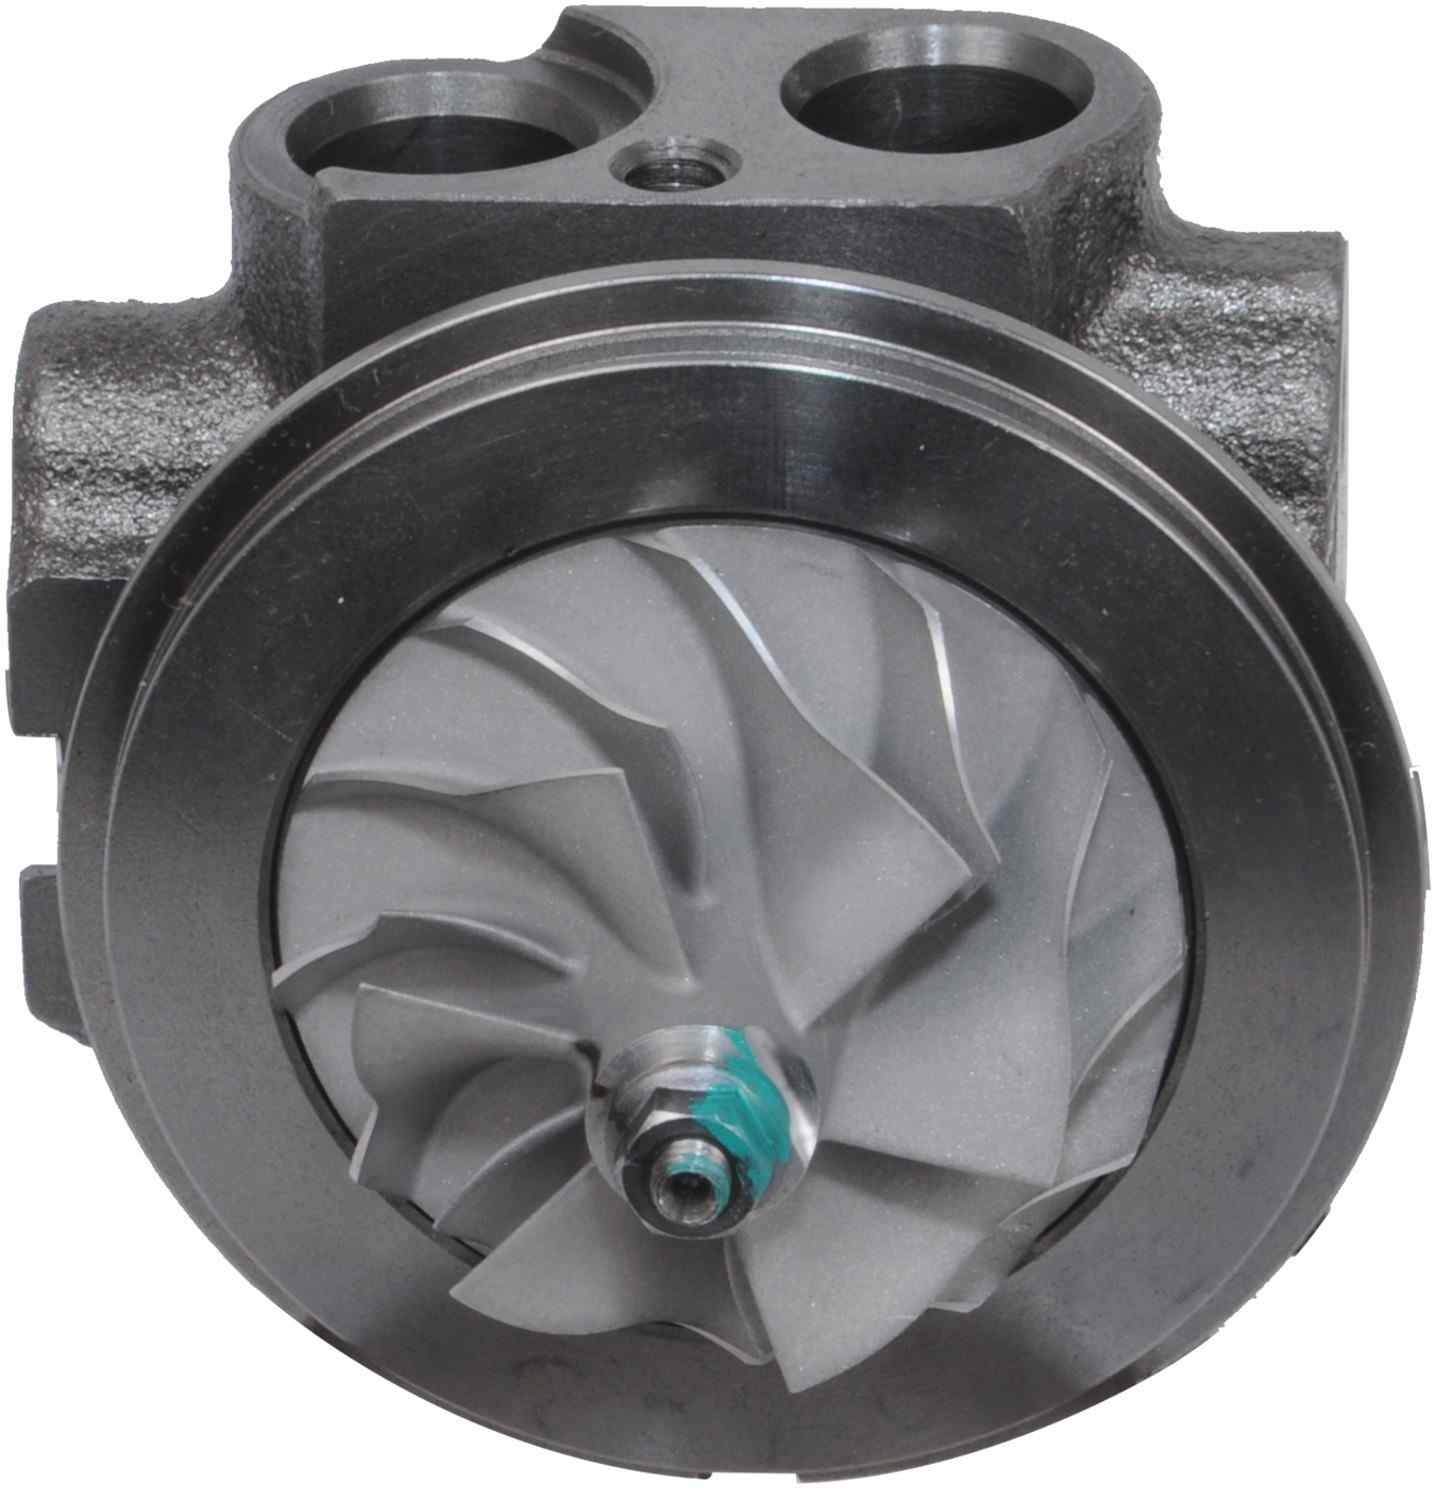 Rotomaster New Turbocharger Cartridge  top view frsport M1030265N